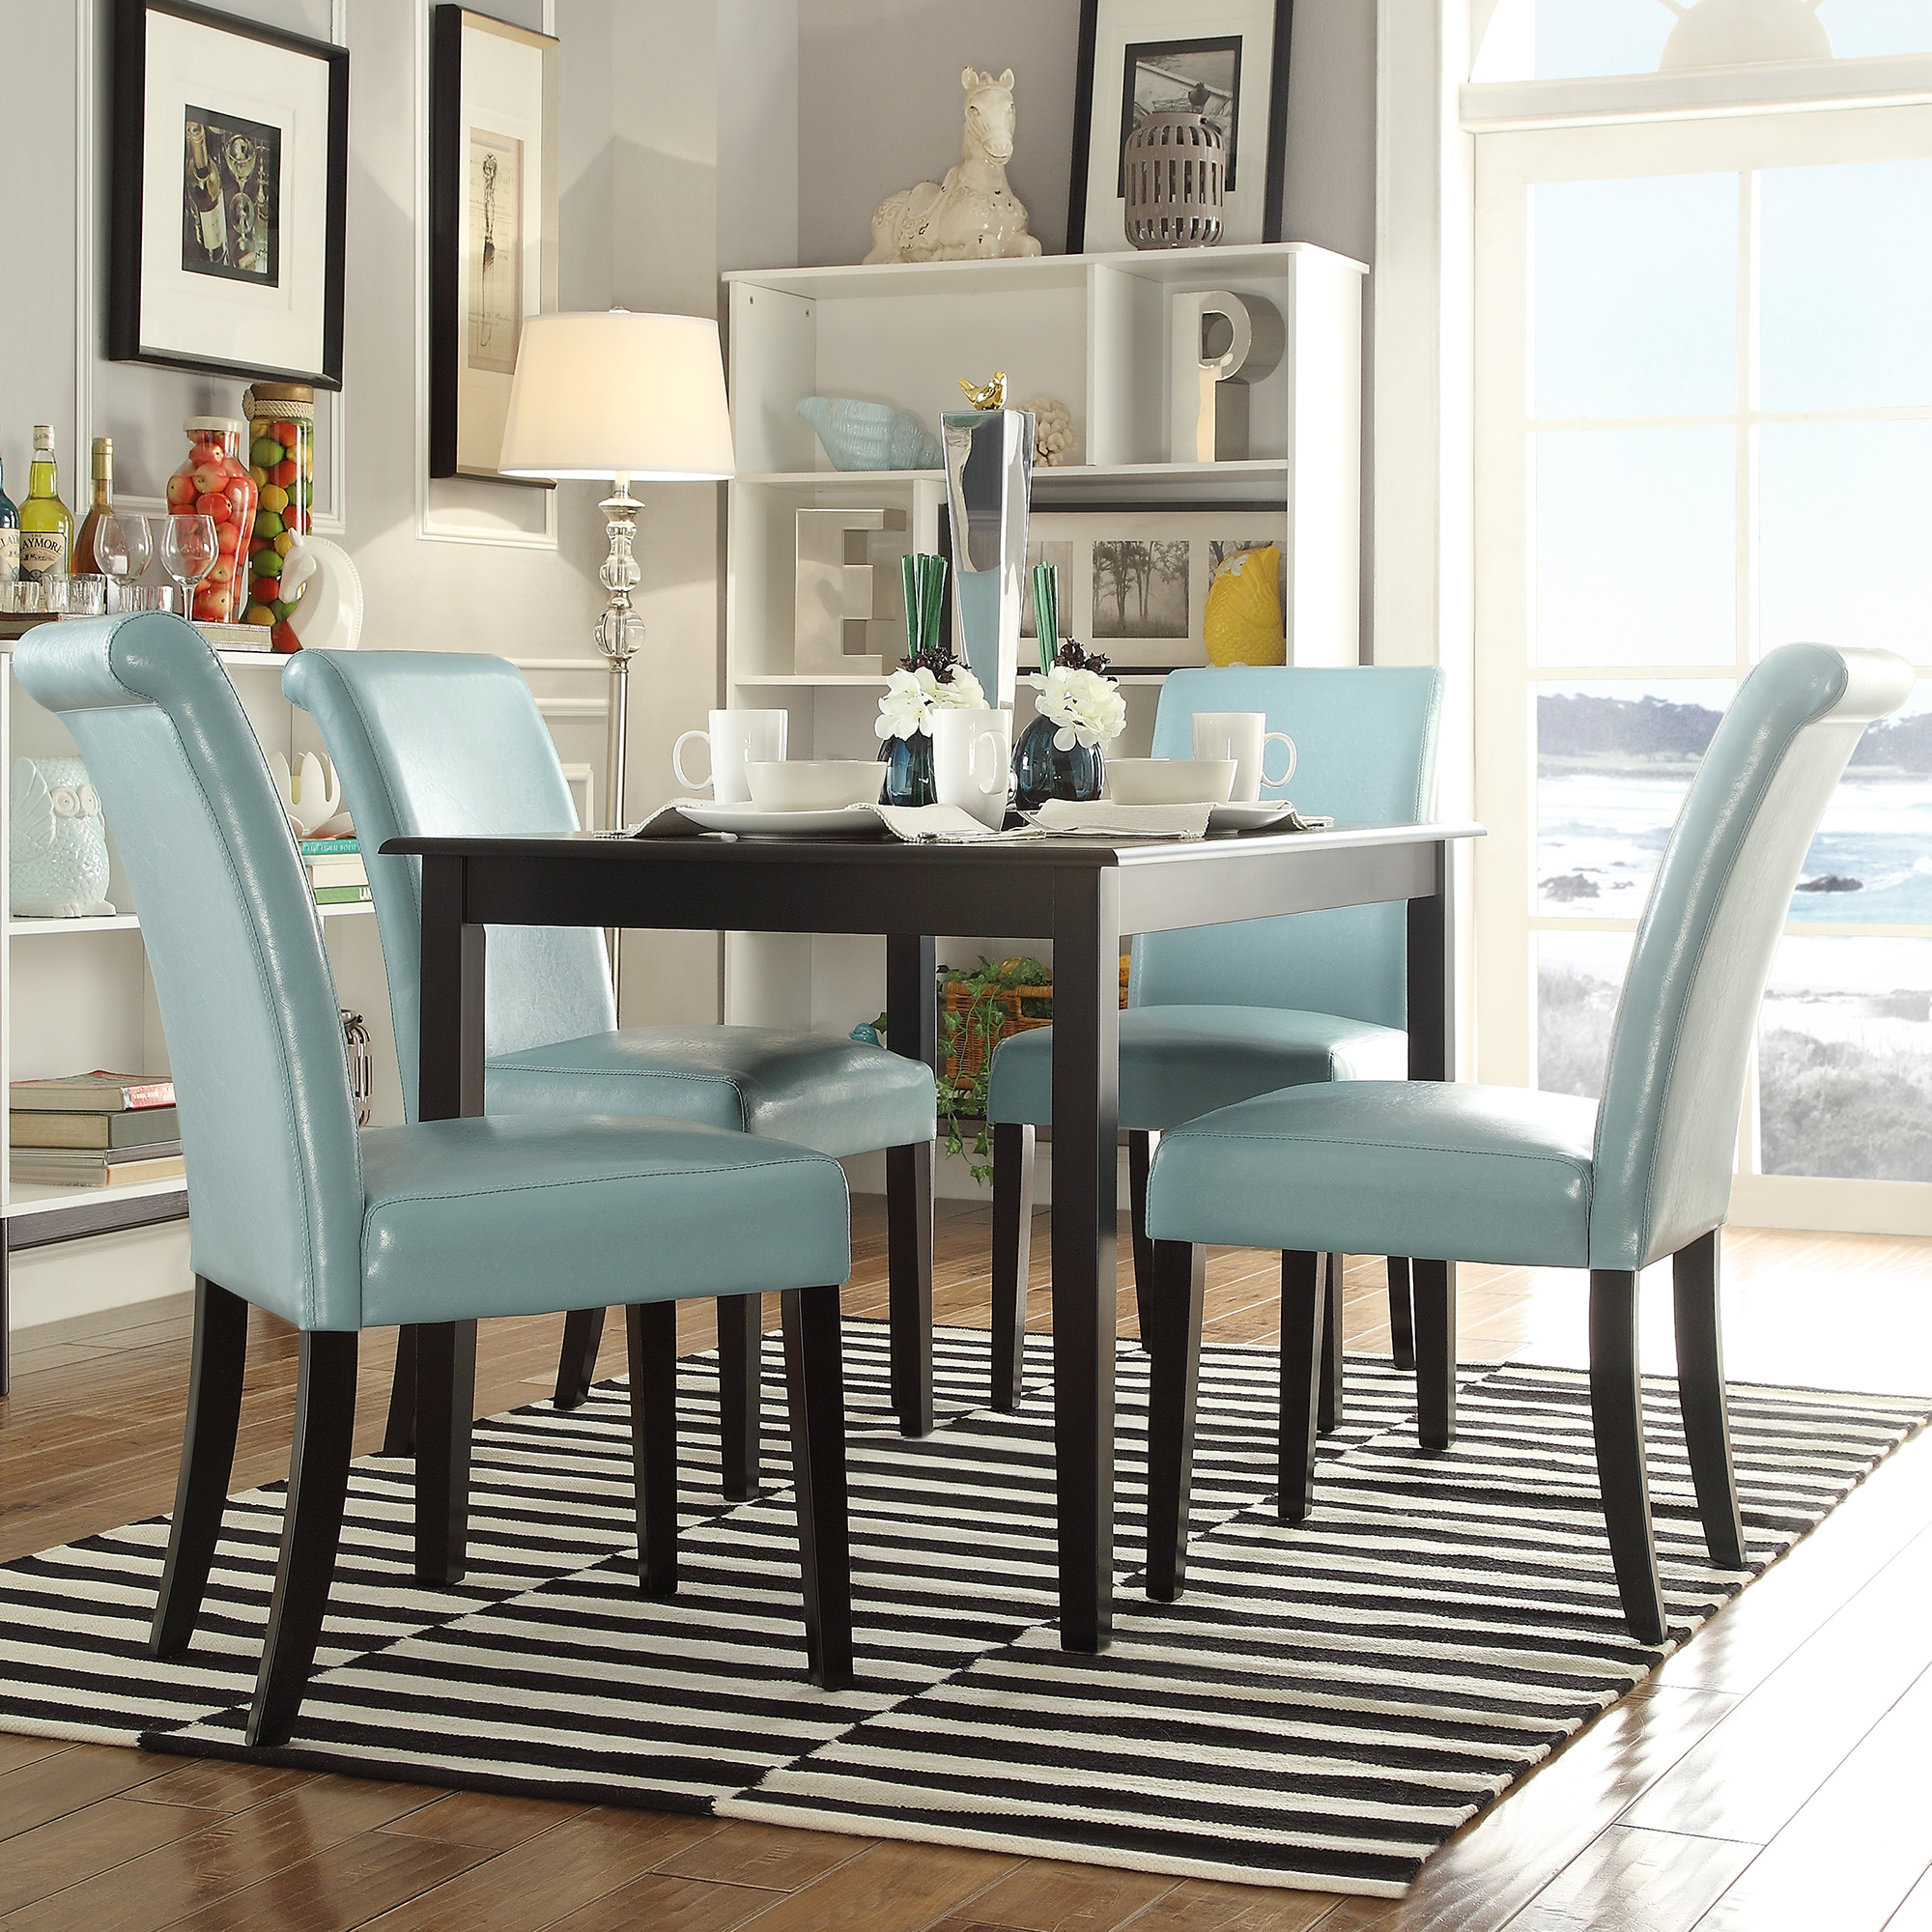 This one of our 10 inspiring dining combinations features a traditional, black wood dining table. The dining table is paired with four parsons chairs, which are upholstered in light blue faux leather and have black wood legs.